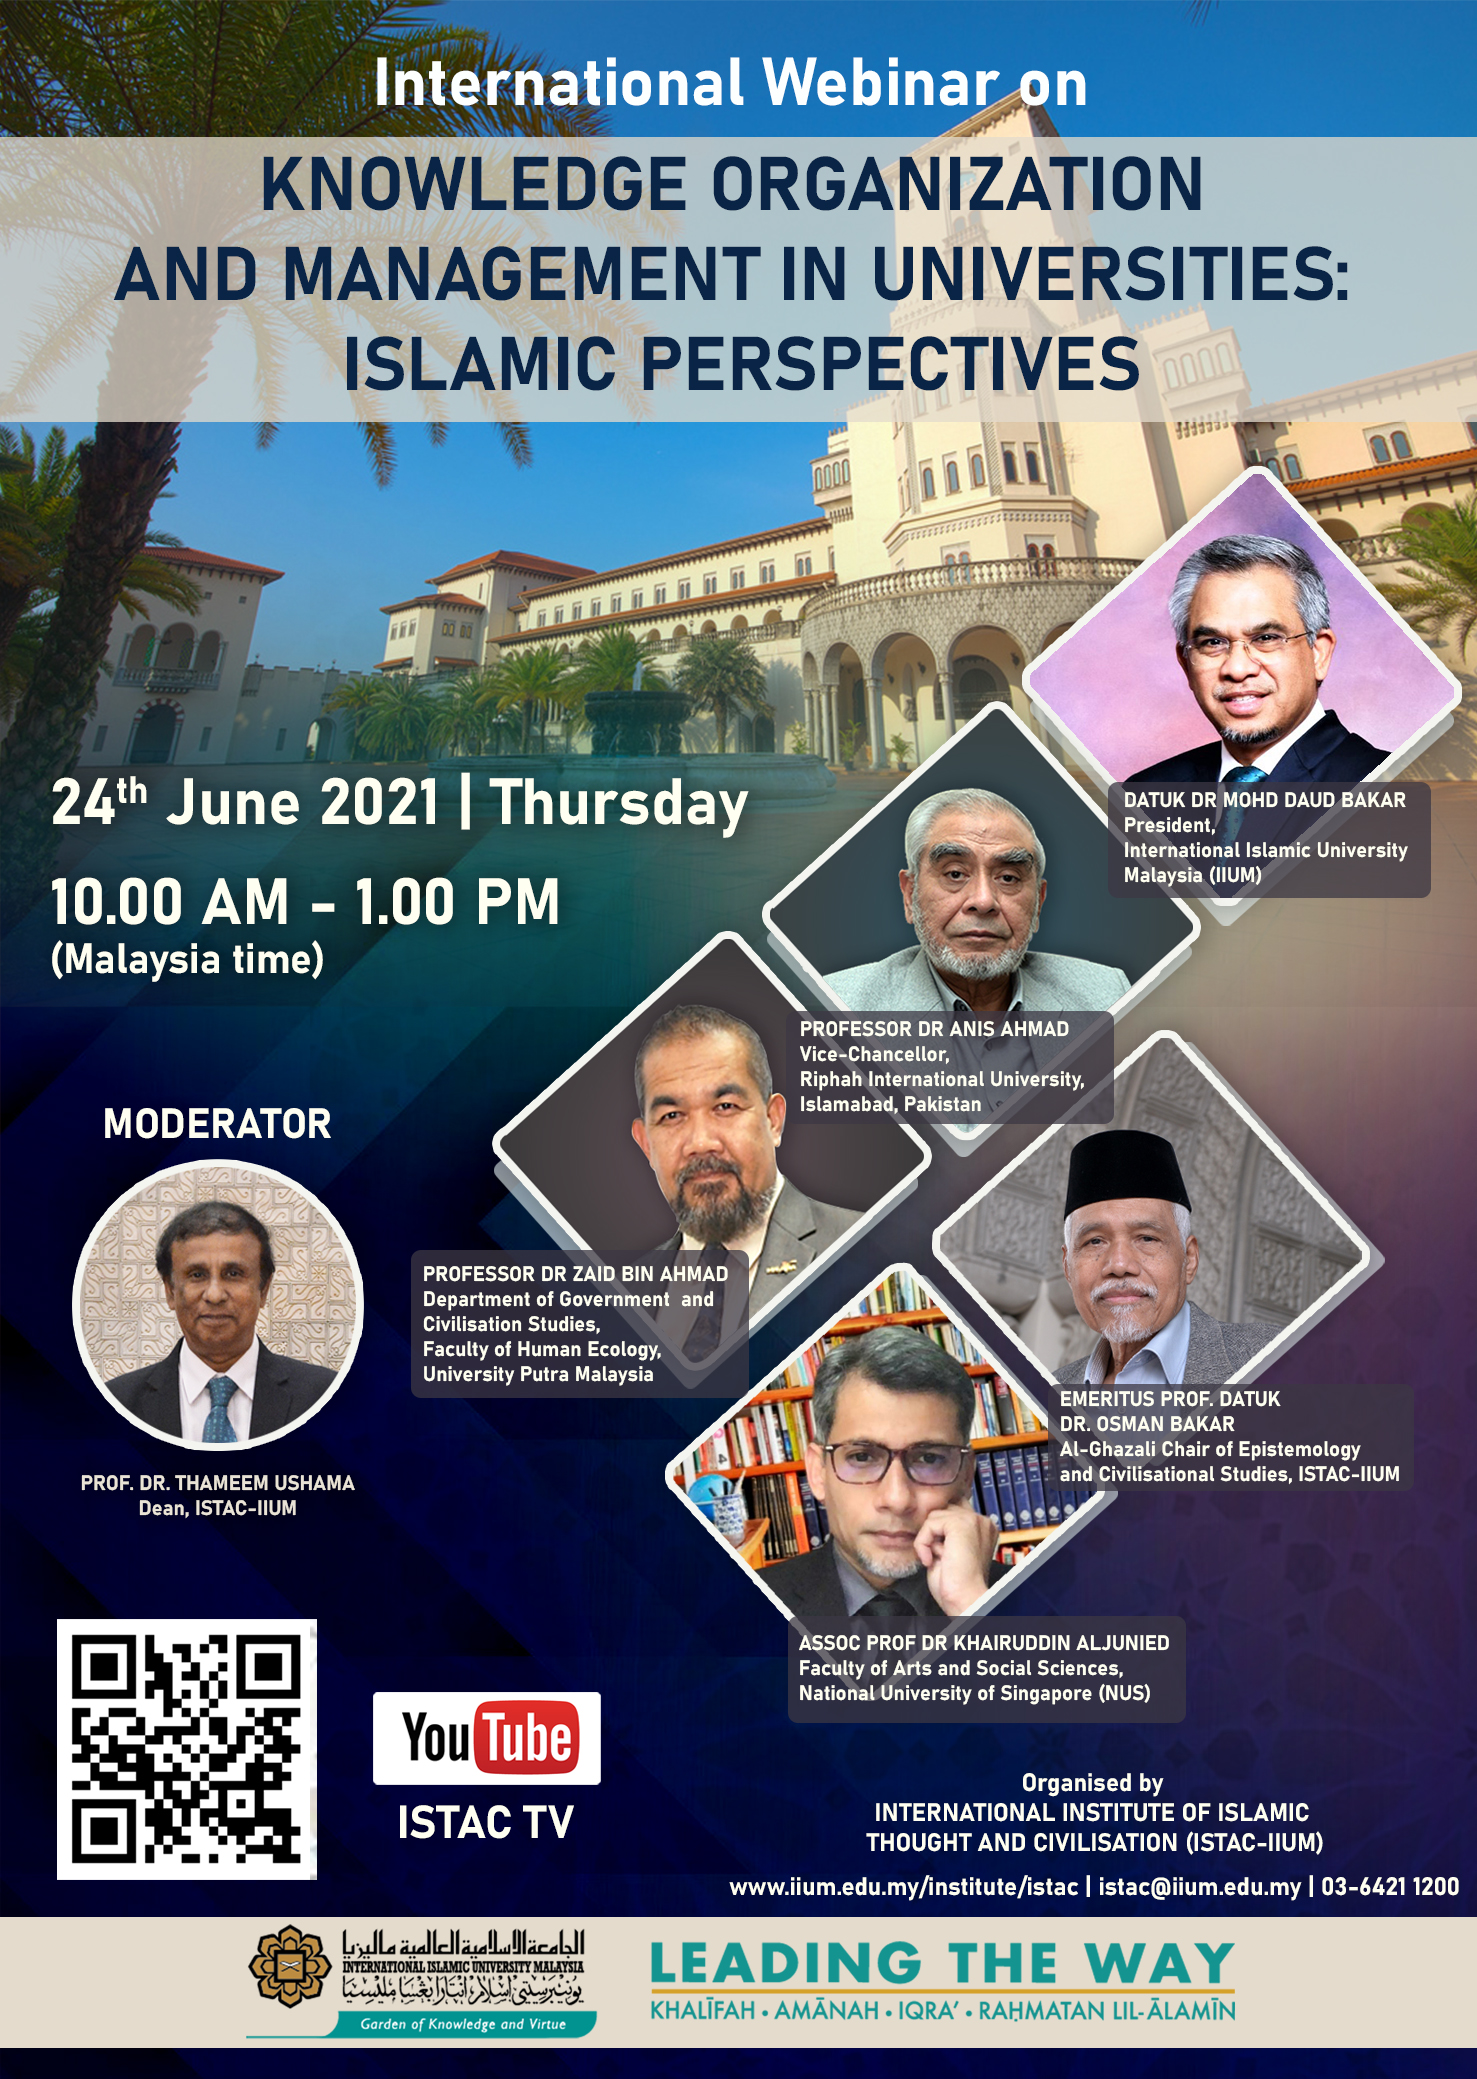 INTERNATIONAL WEBINAR ON KNOWLEDGE ORGANIZATION  AND MANAGEMENT IN UNIVERSITIES:  ISLAMIC PERSPECTIVES